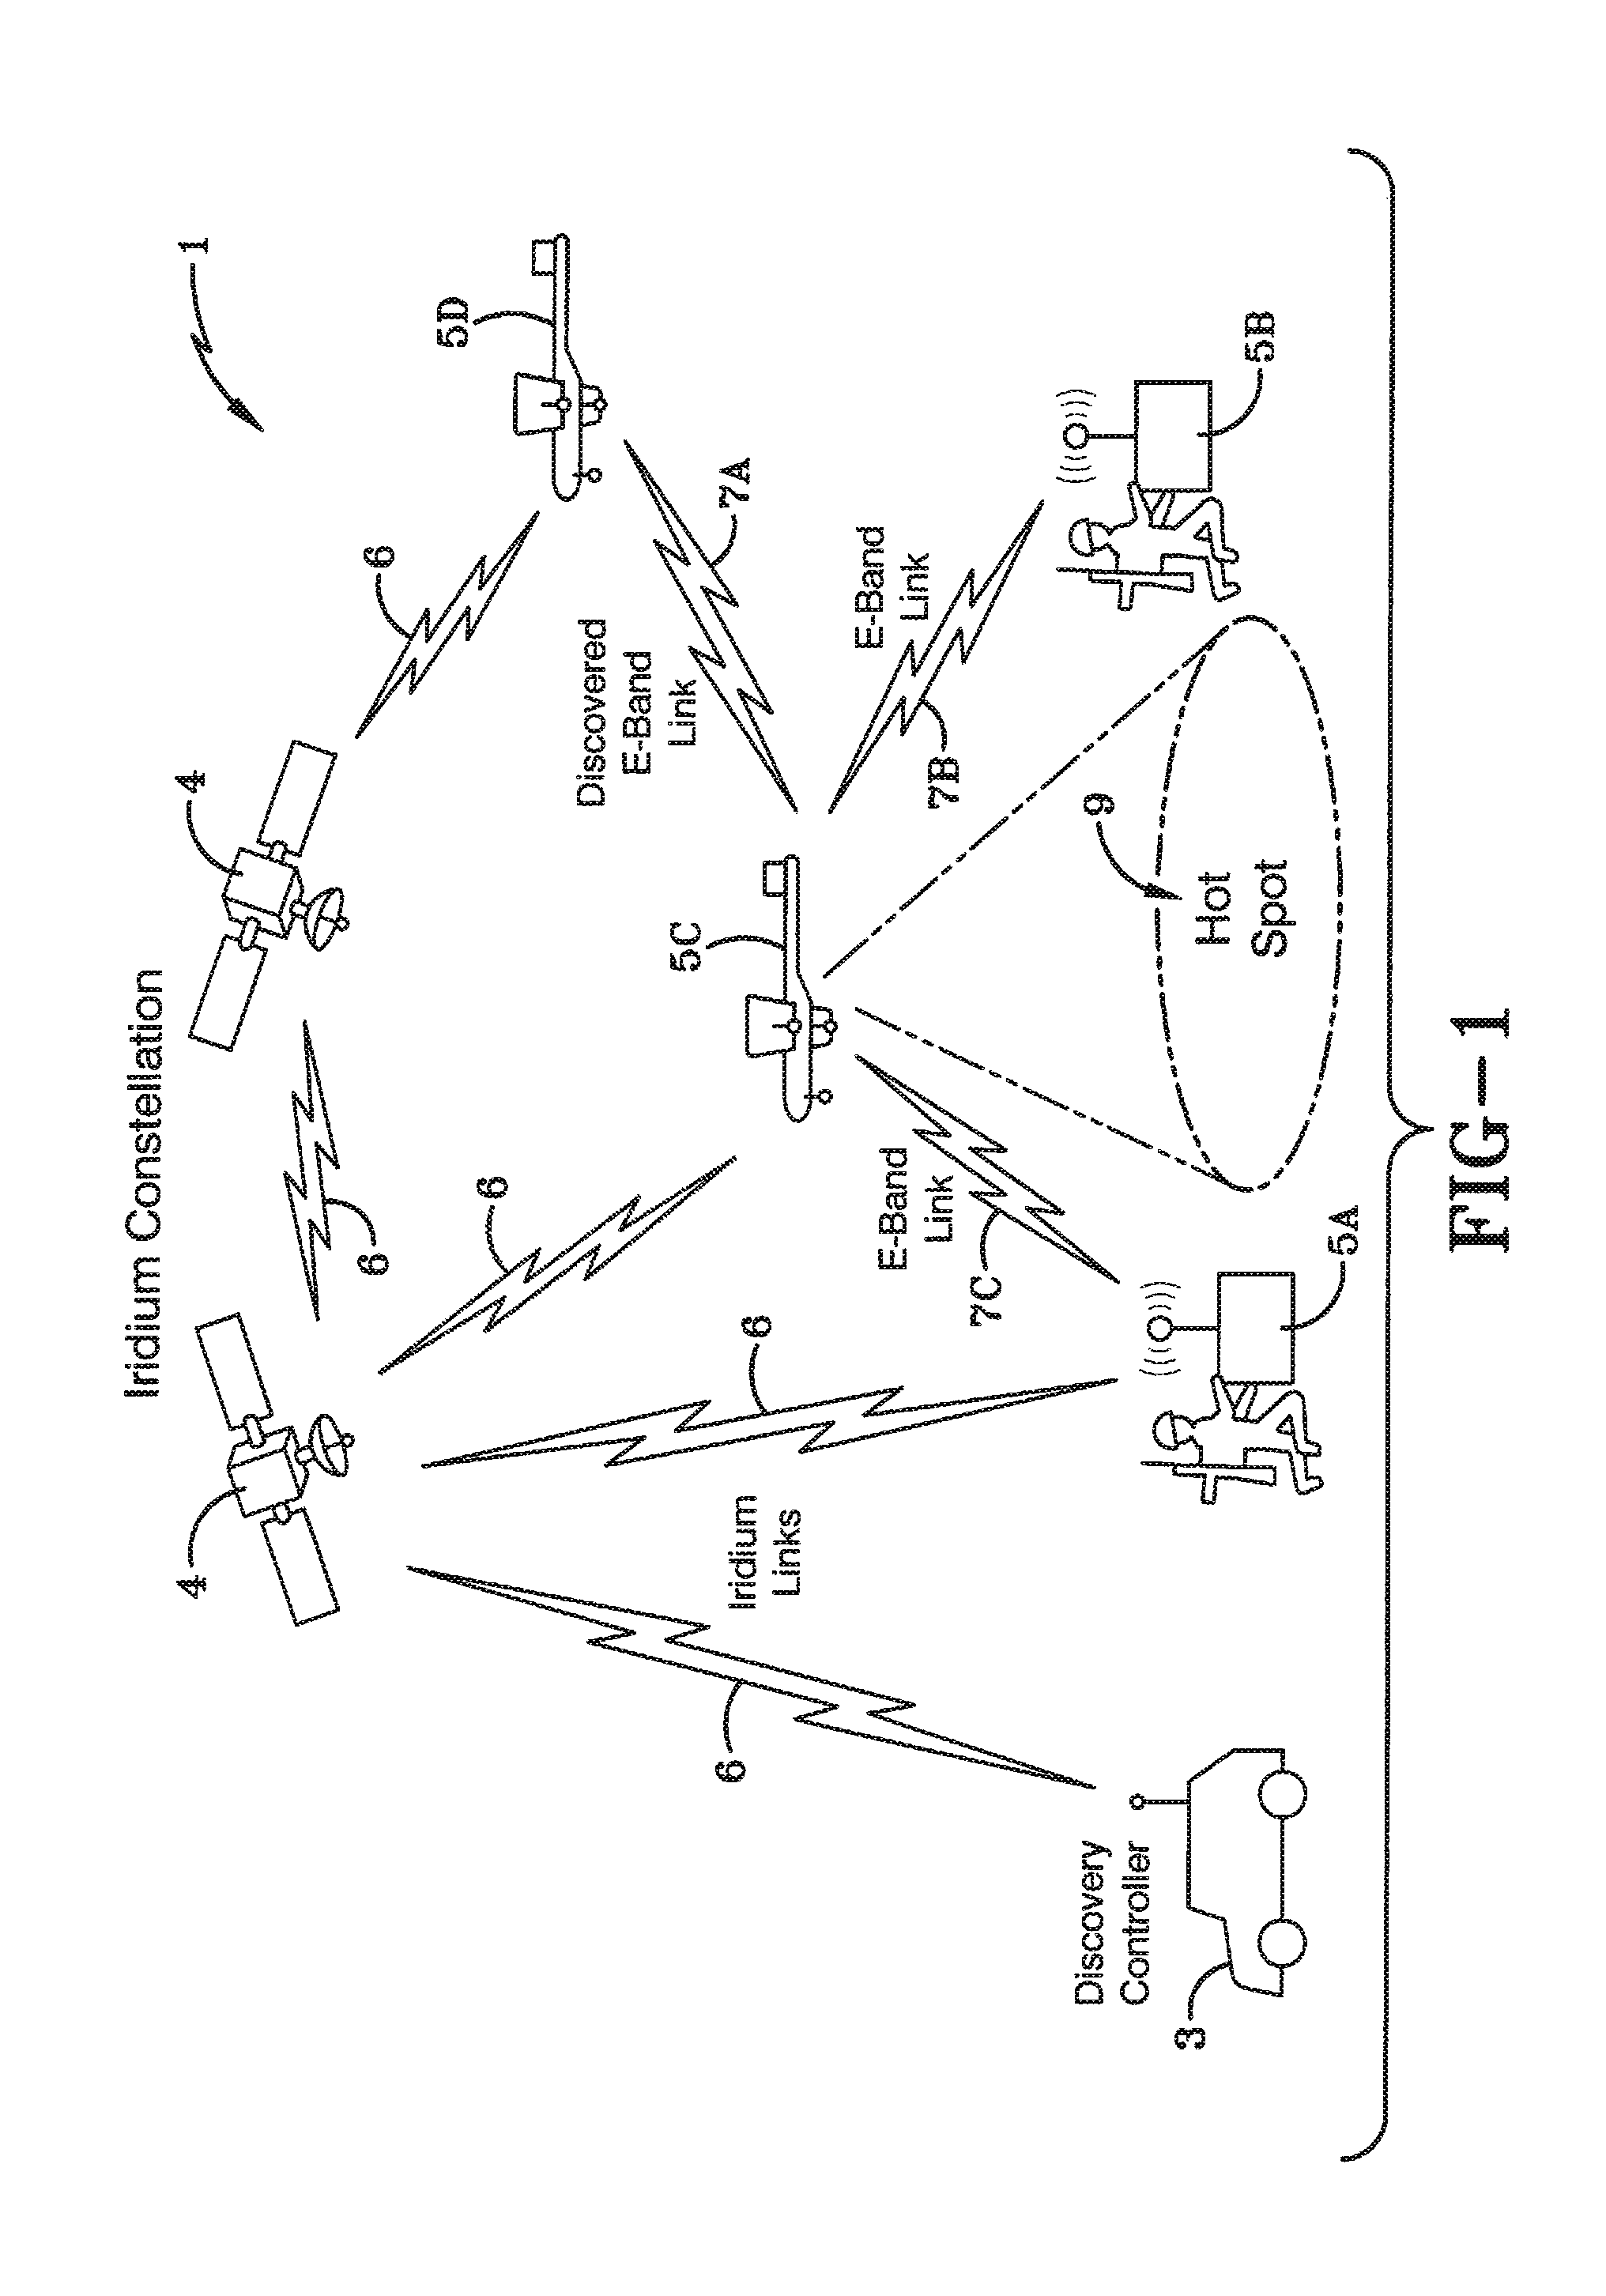 Discovery and acquisition methods for directional networking